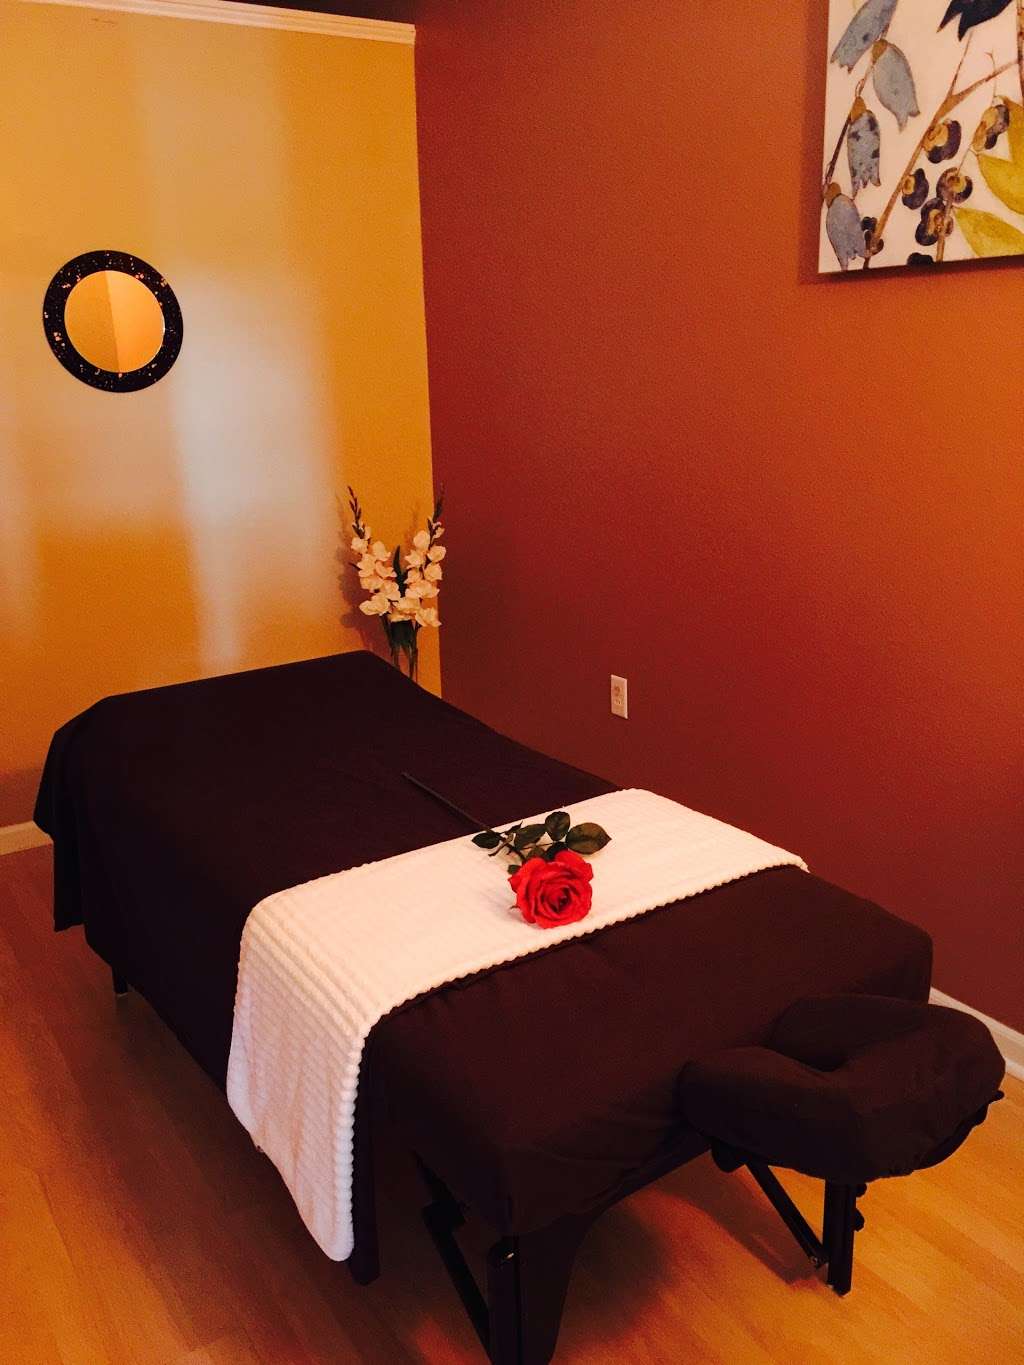 Cicy Spa And Massage | 843 NJ-33 Business #7, Freehold, NJ 07728 | Phone: (732) 866-0001